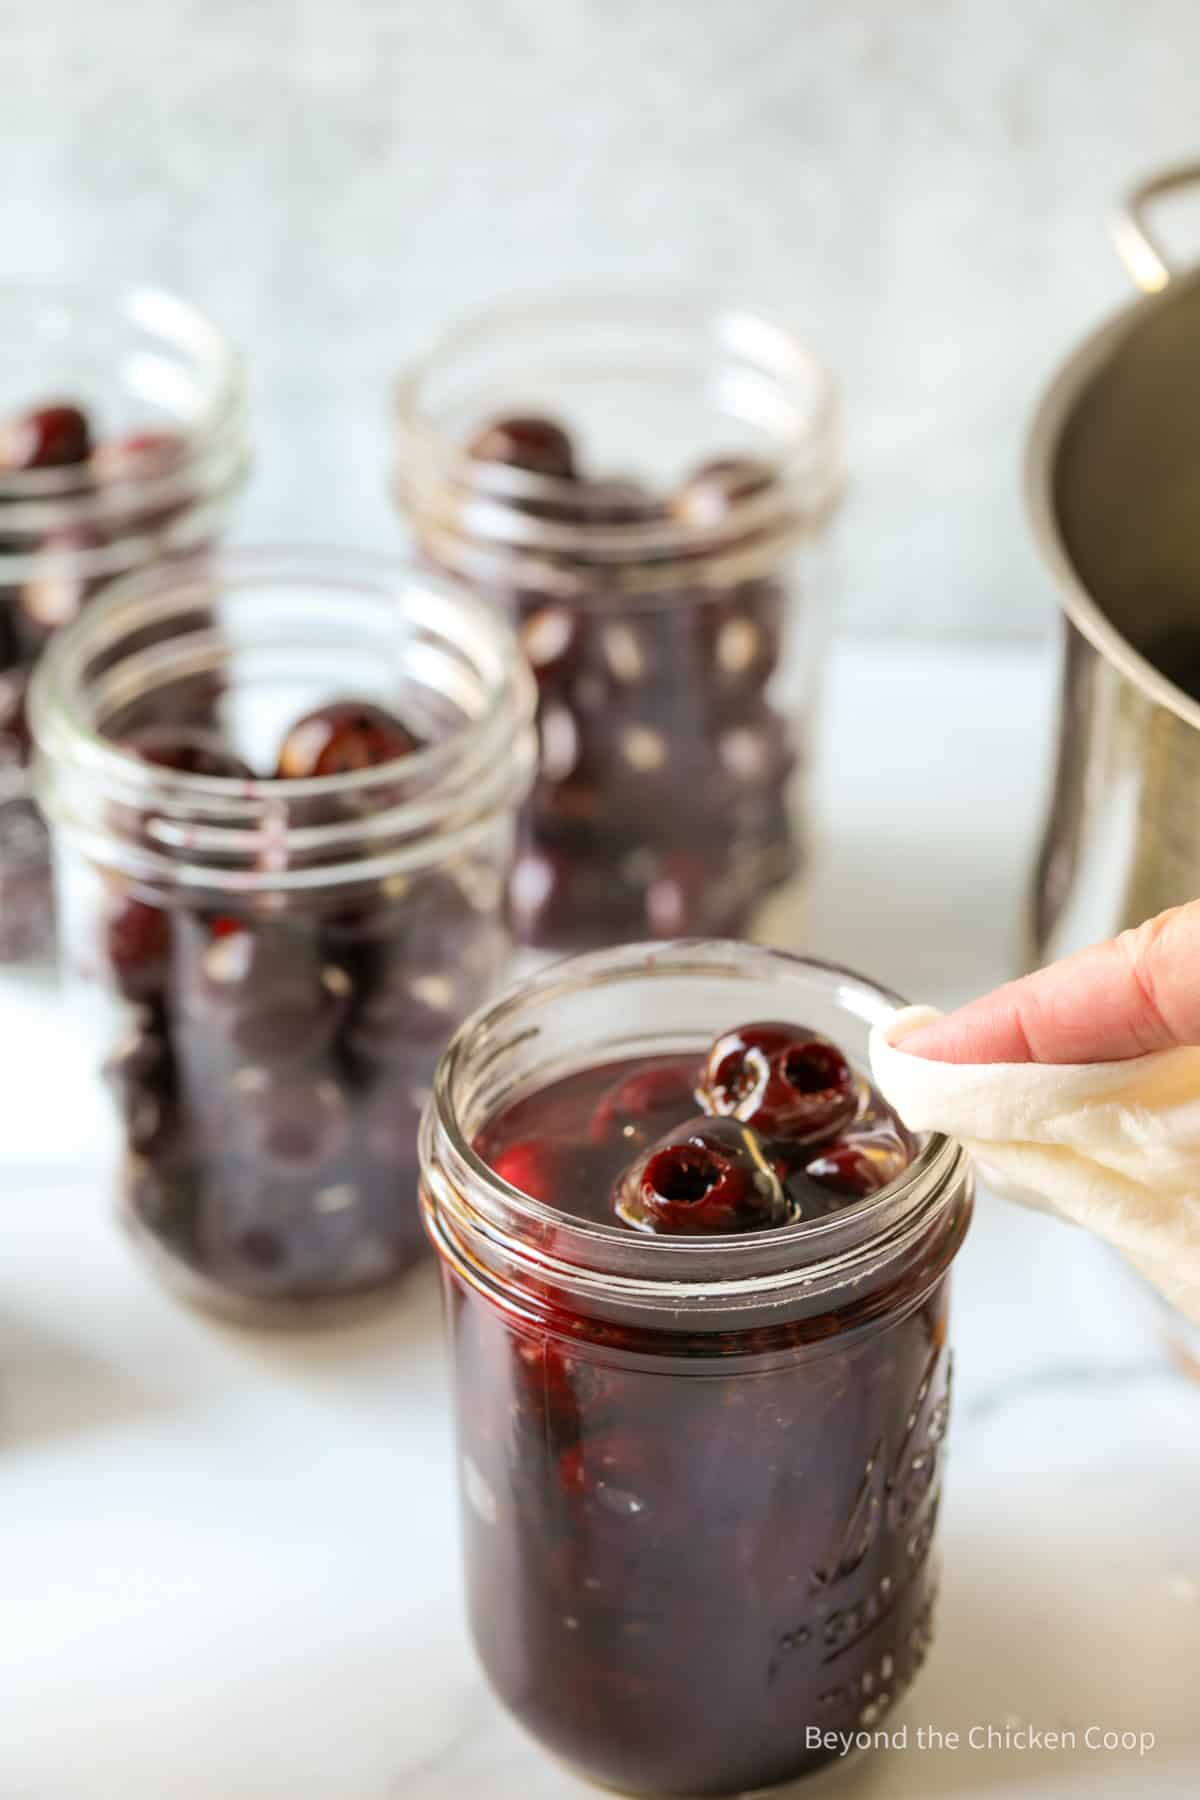 Wiping down the rim of a canning jar filled with cherries. 